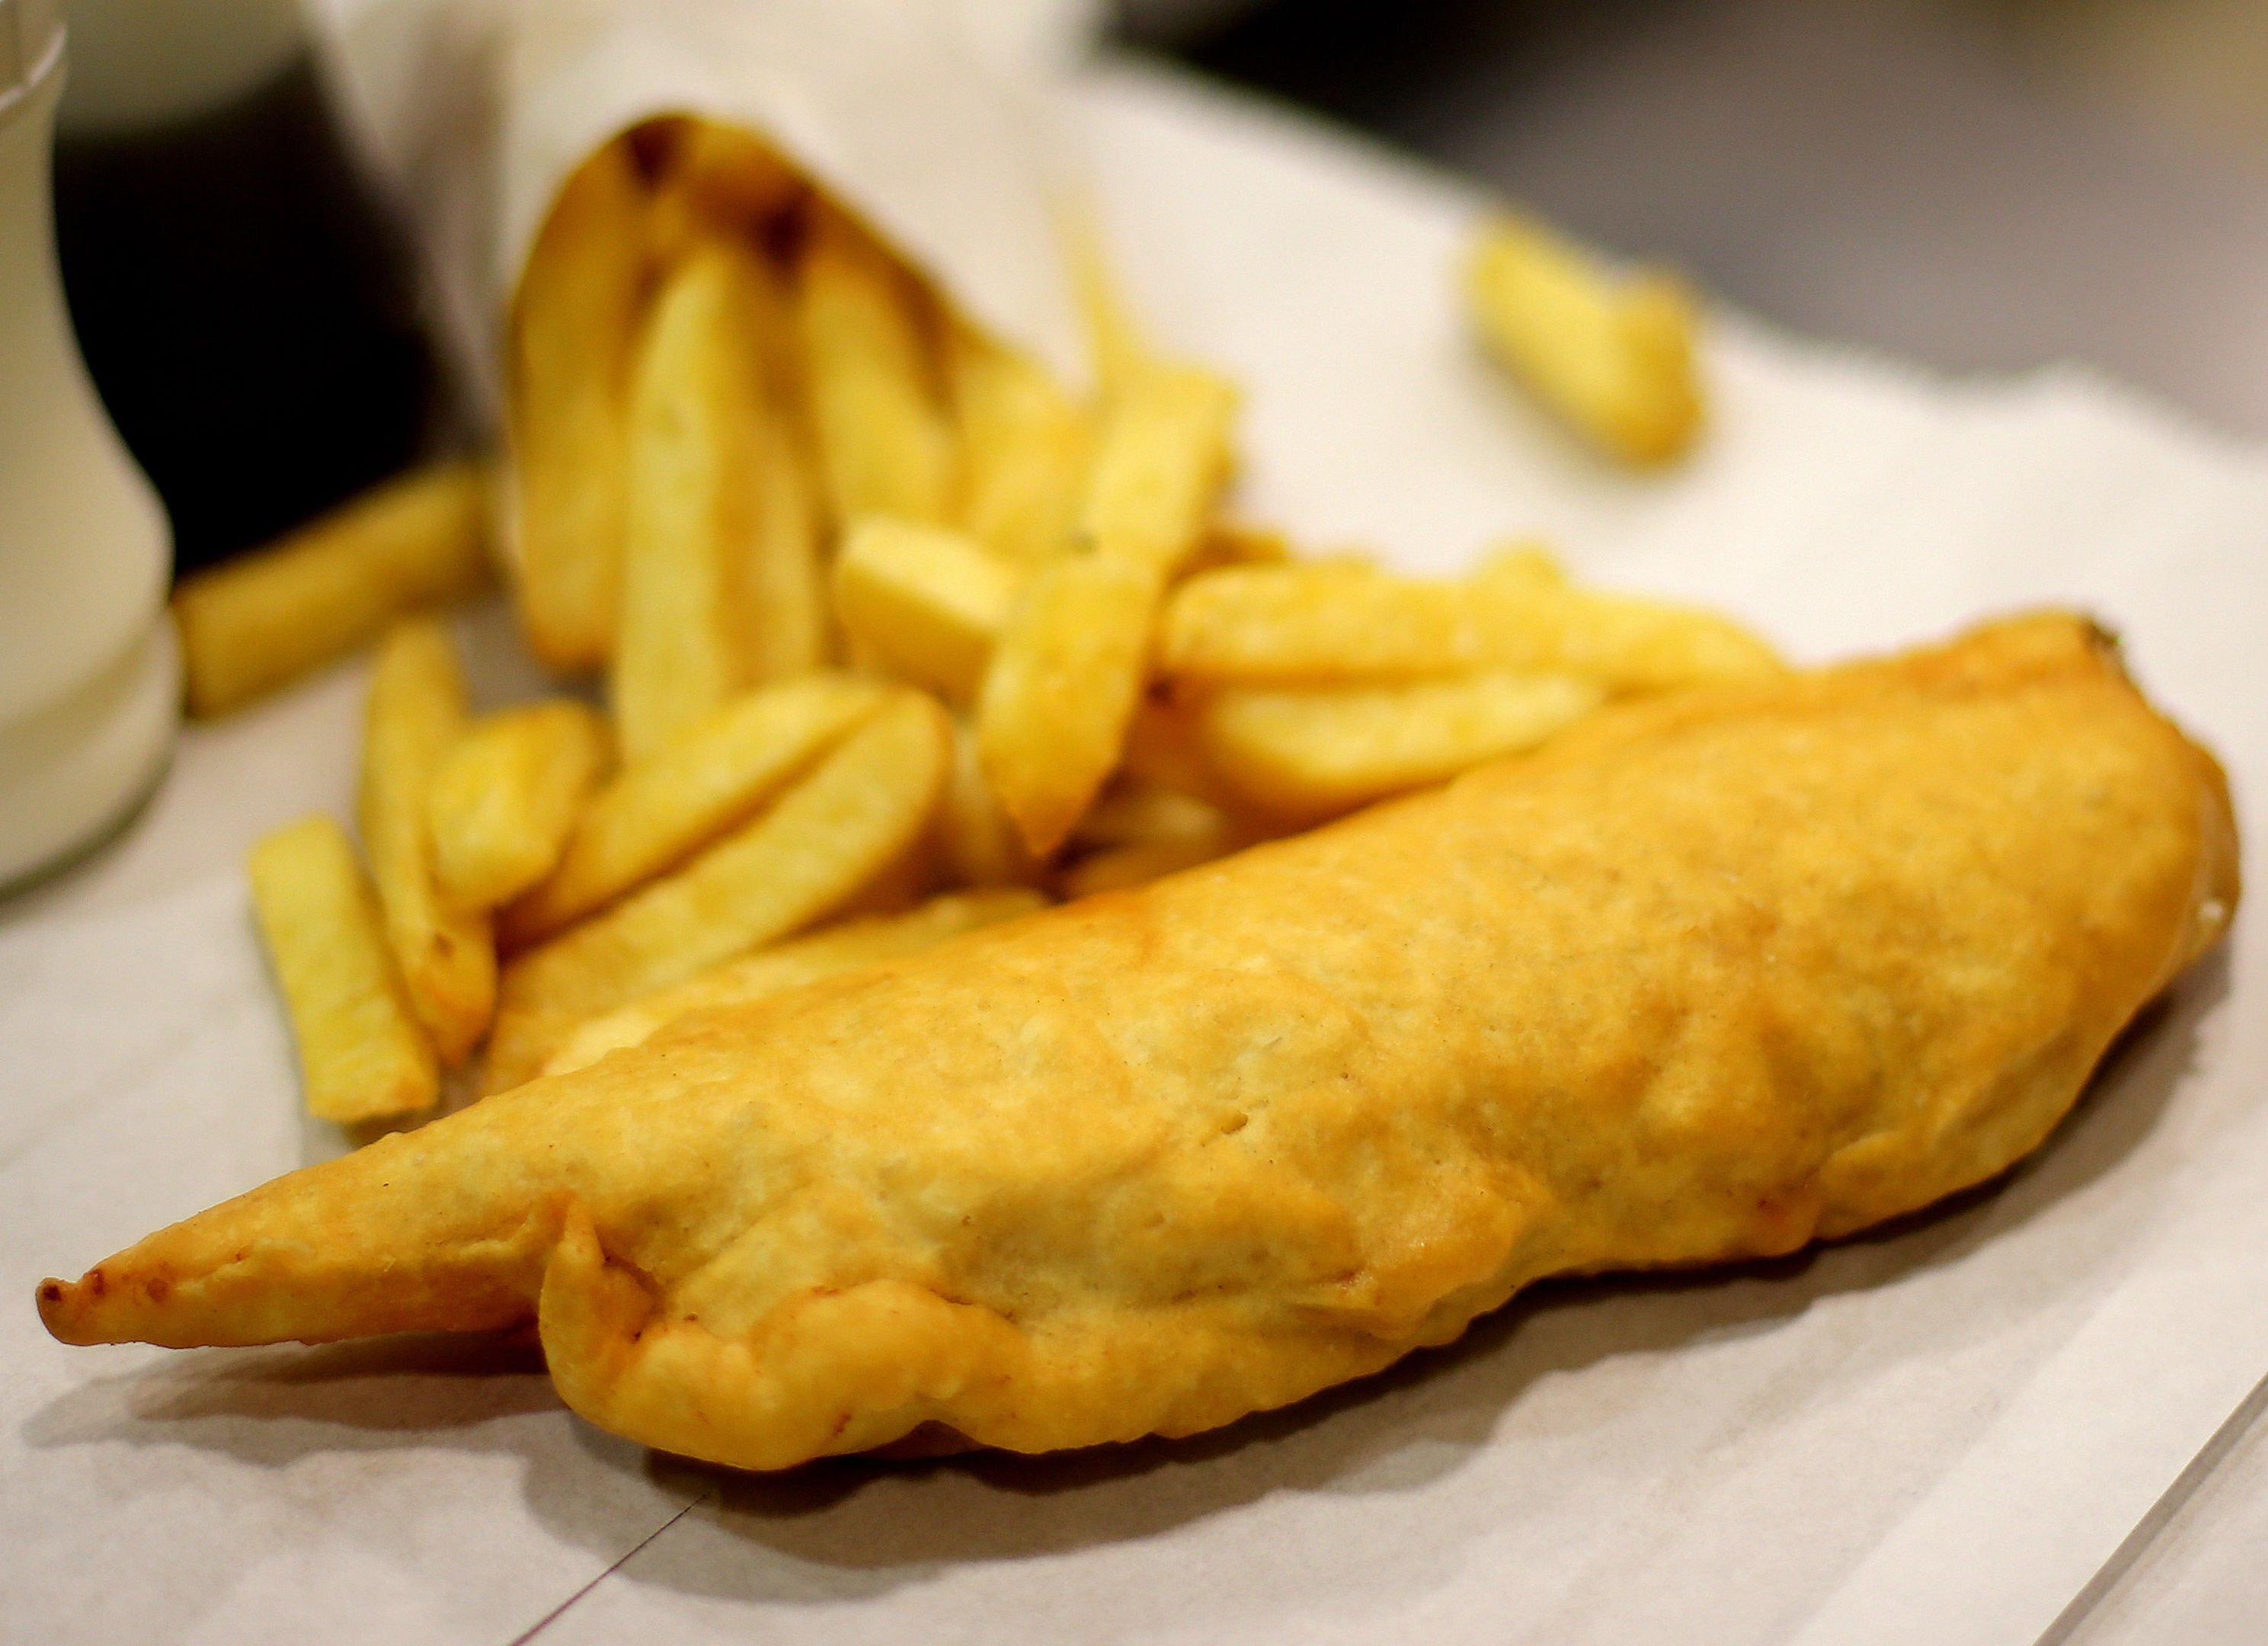 Child portions of fish could be on the way because of the shrinking effect of climate change, an expert has warned. (Niall Carson/PA Wire)